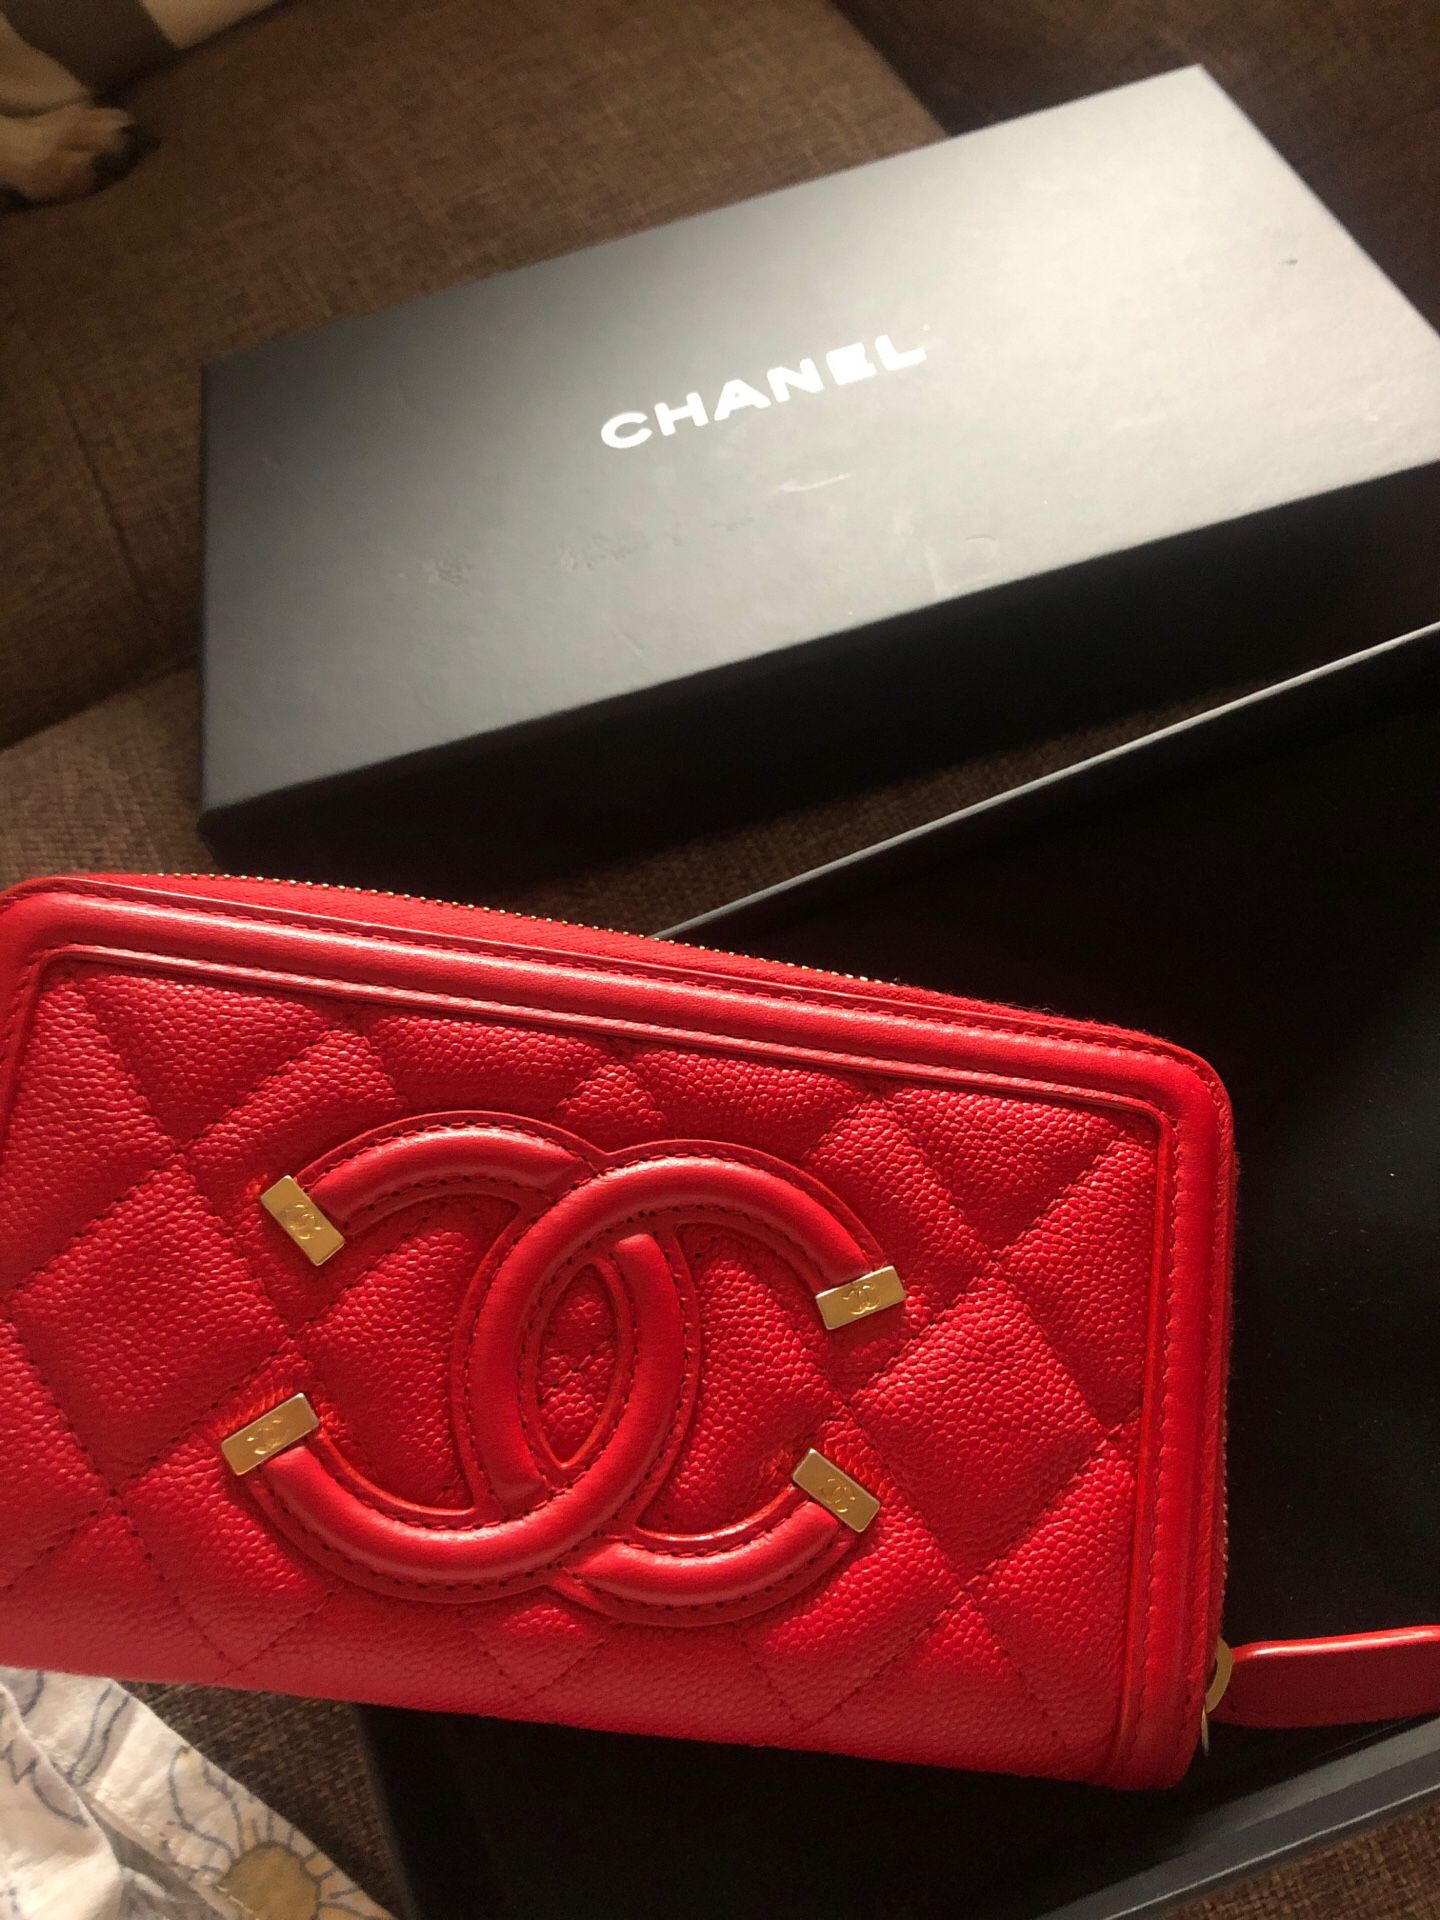 Chanel small zip wallet. $450 no lower offers please.